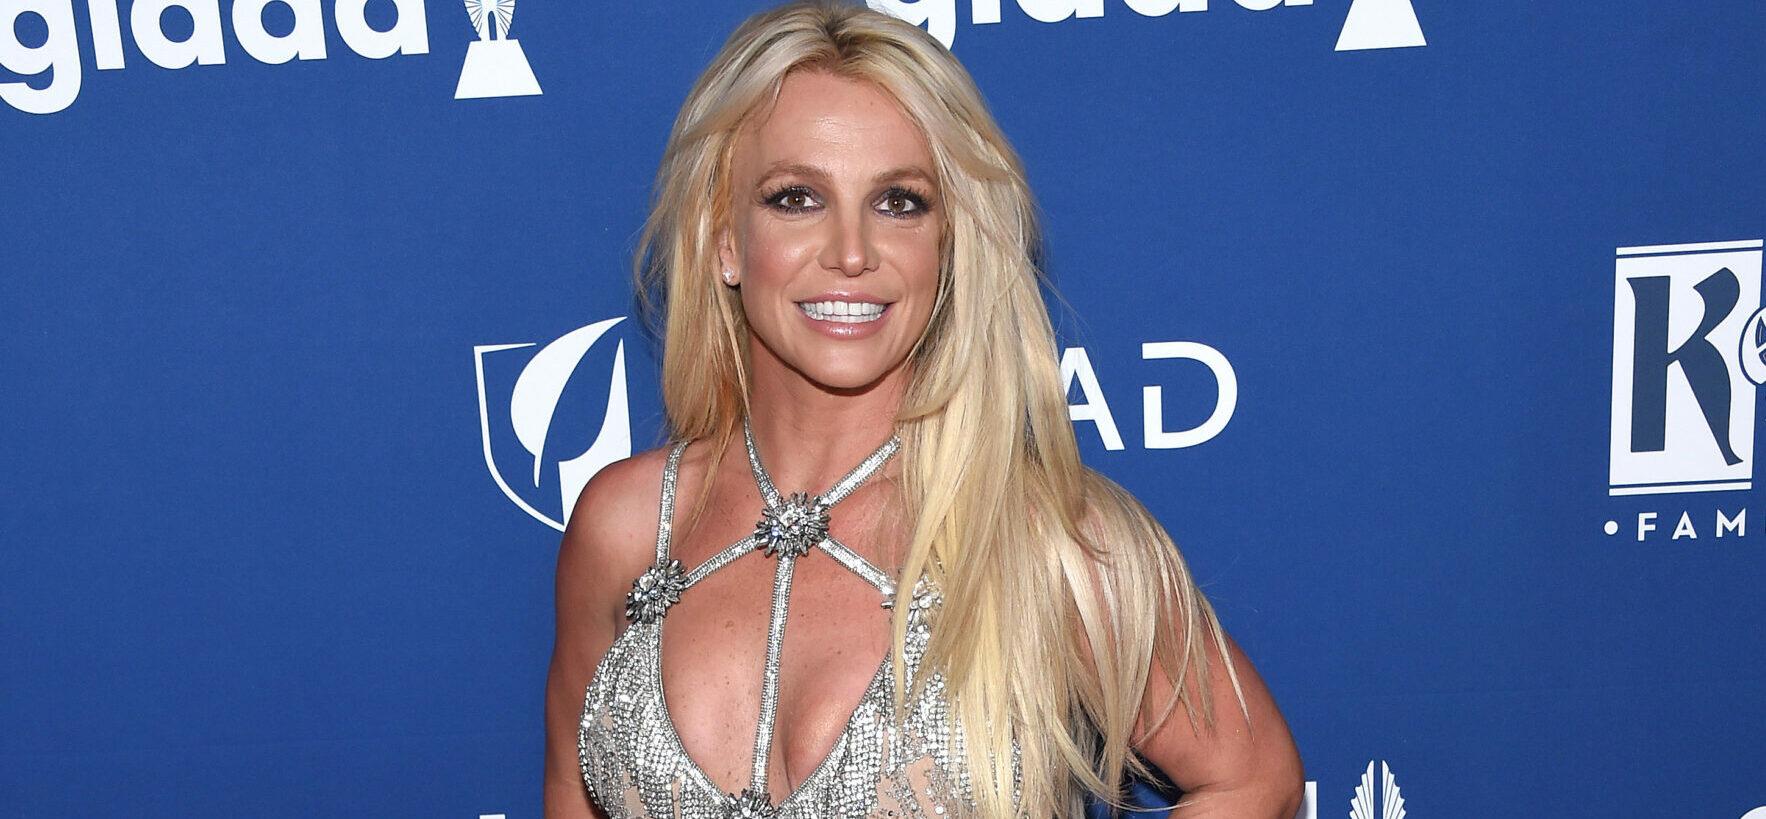 Britney Spears Shares A ‘Different Edit’ Dancing In A Sheer Dress